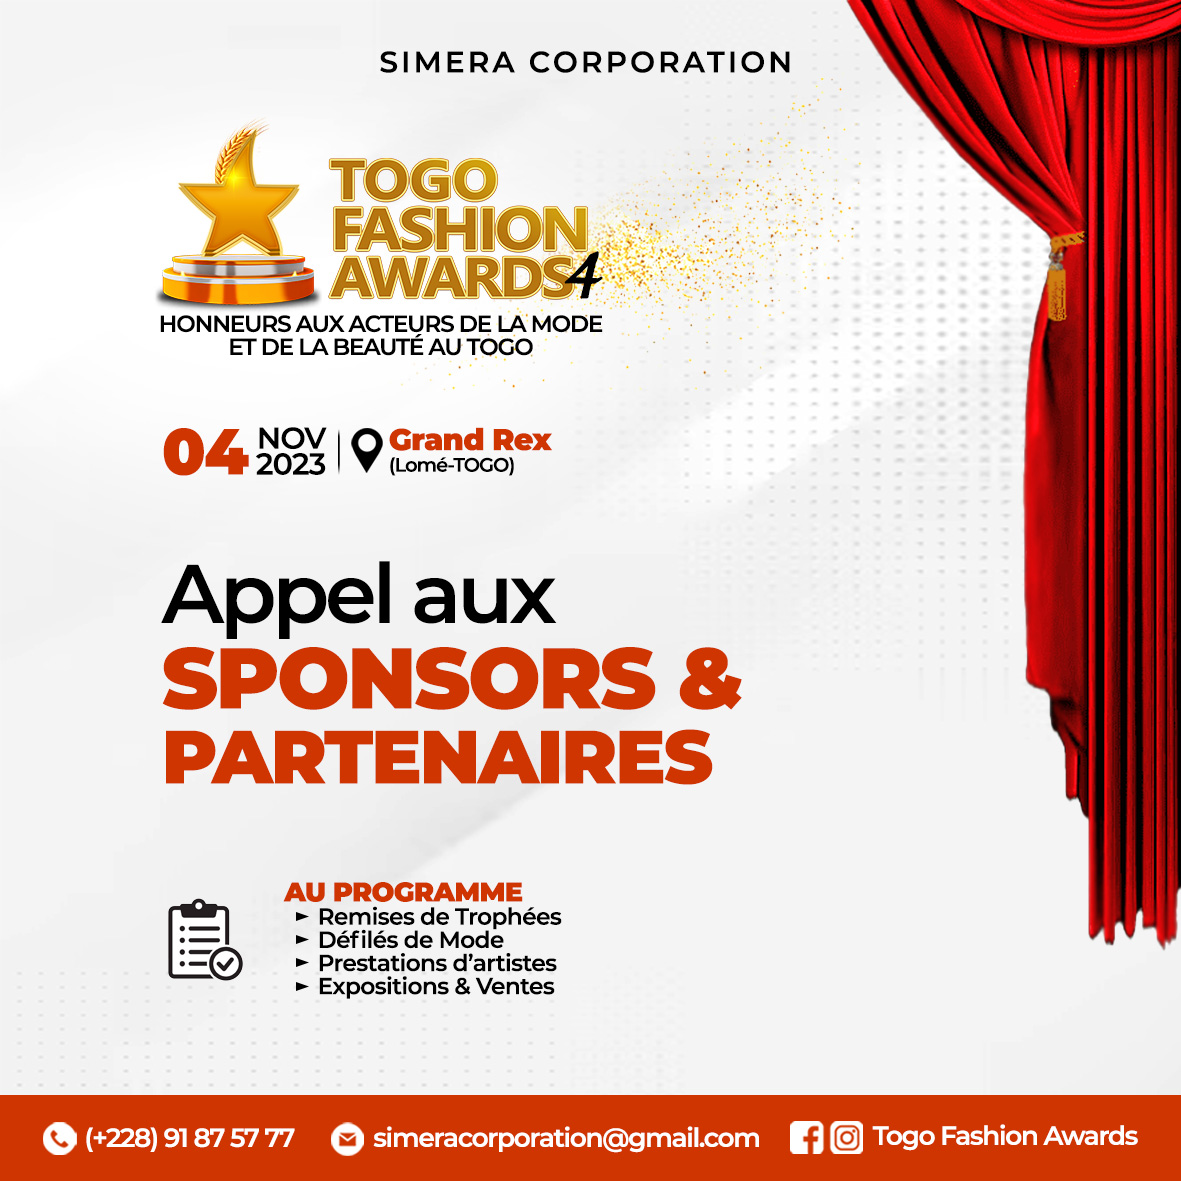 You are currently viewing TOGO FASHION AWARDS édition 4 : Appel aux Sponsors & Partenaires